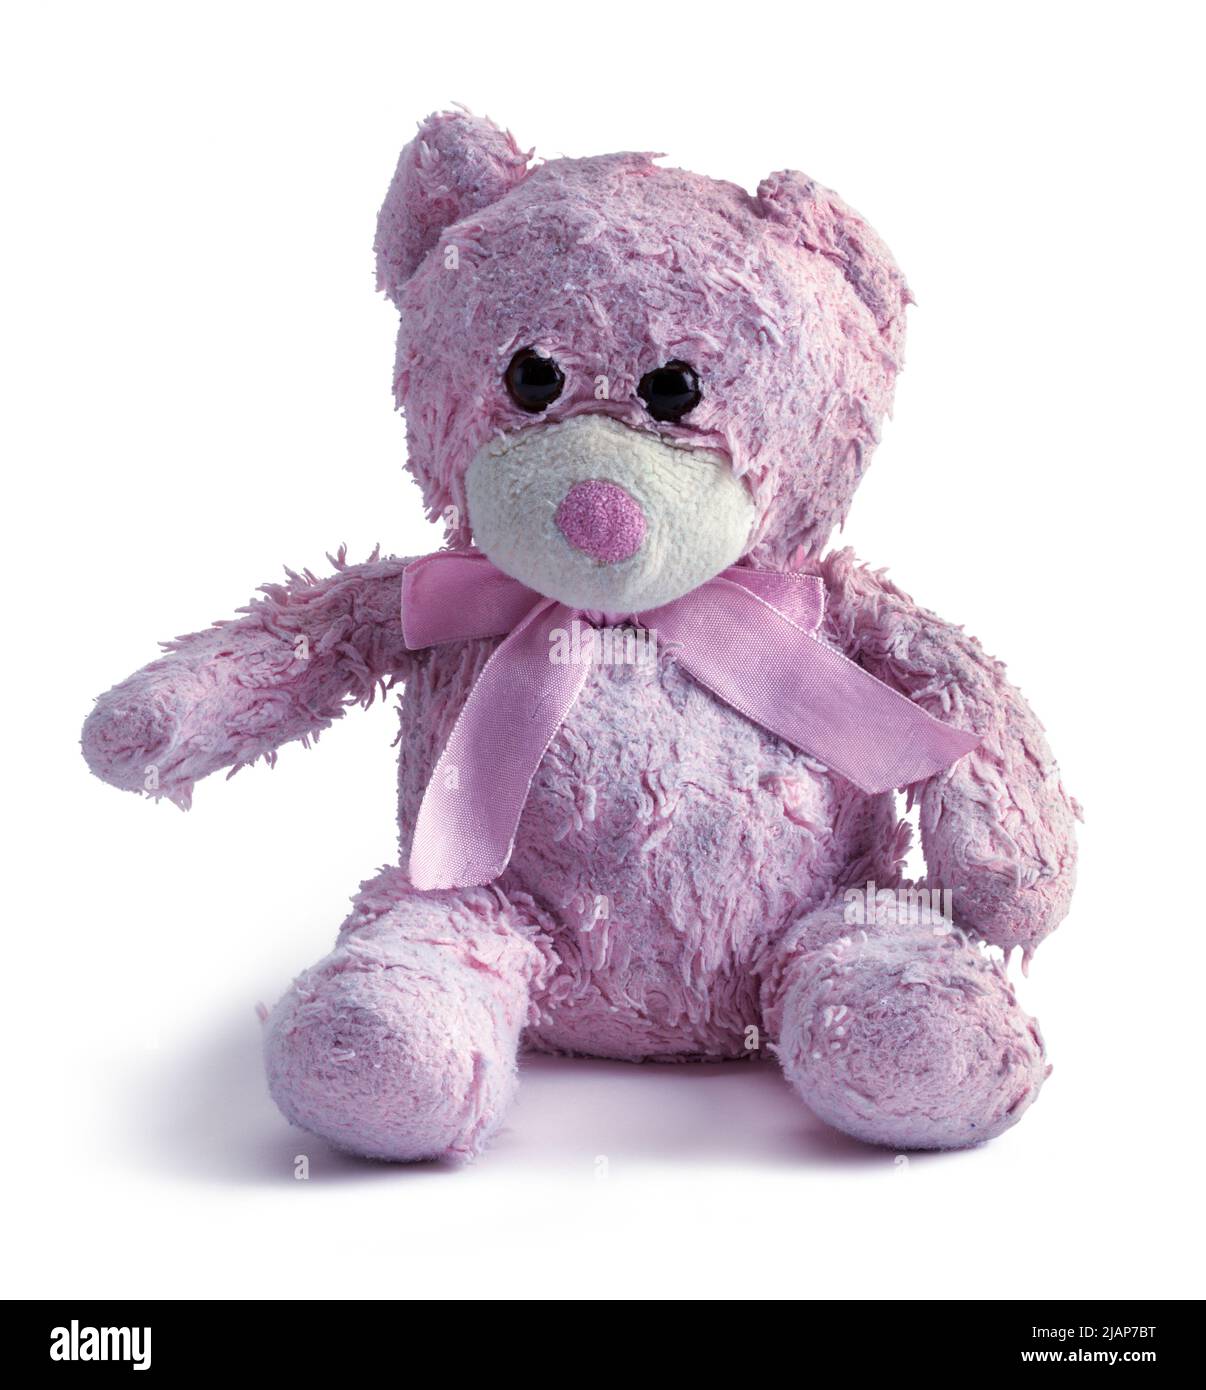 Old Pink Teddy Bear Cut Out on White. Stock Photo